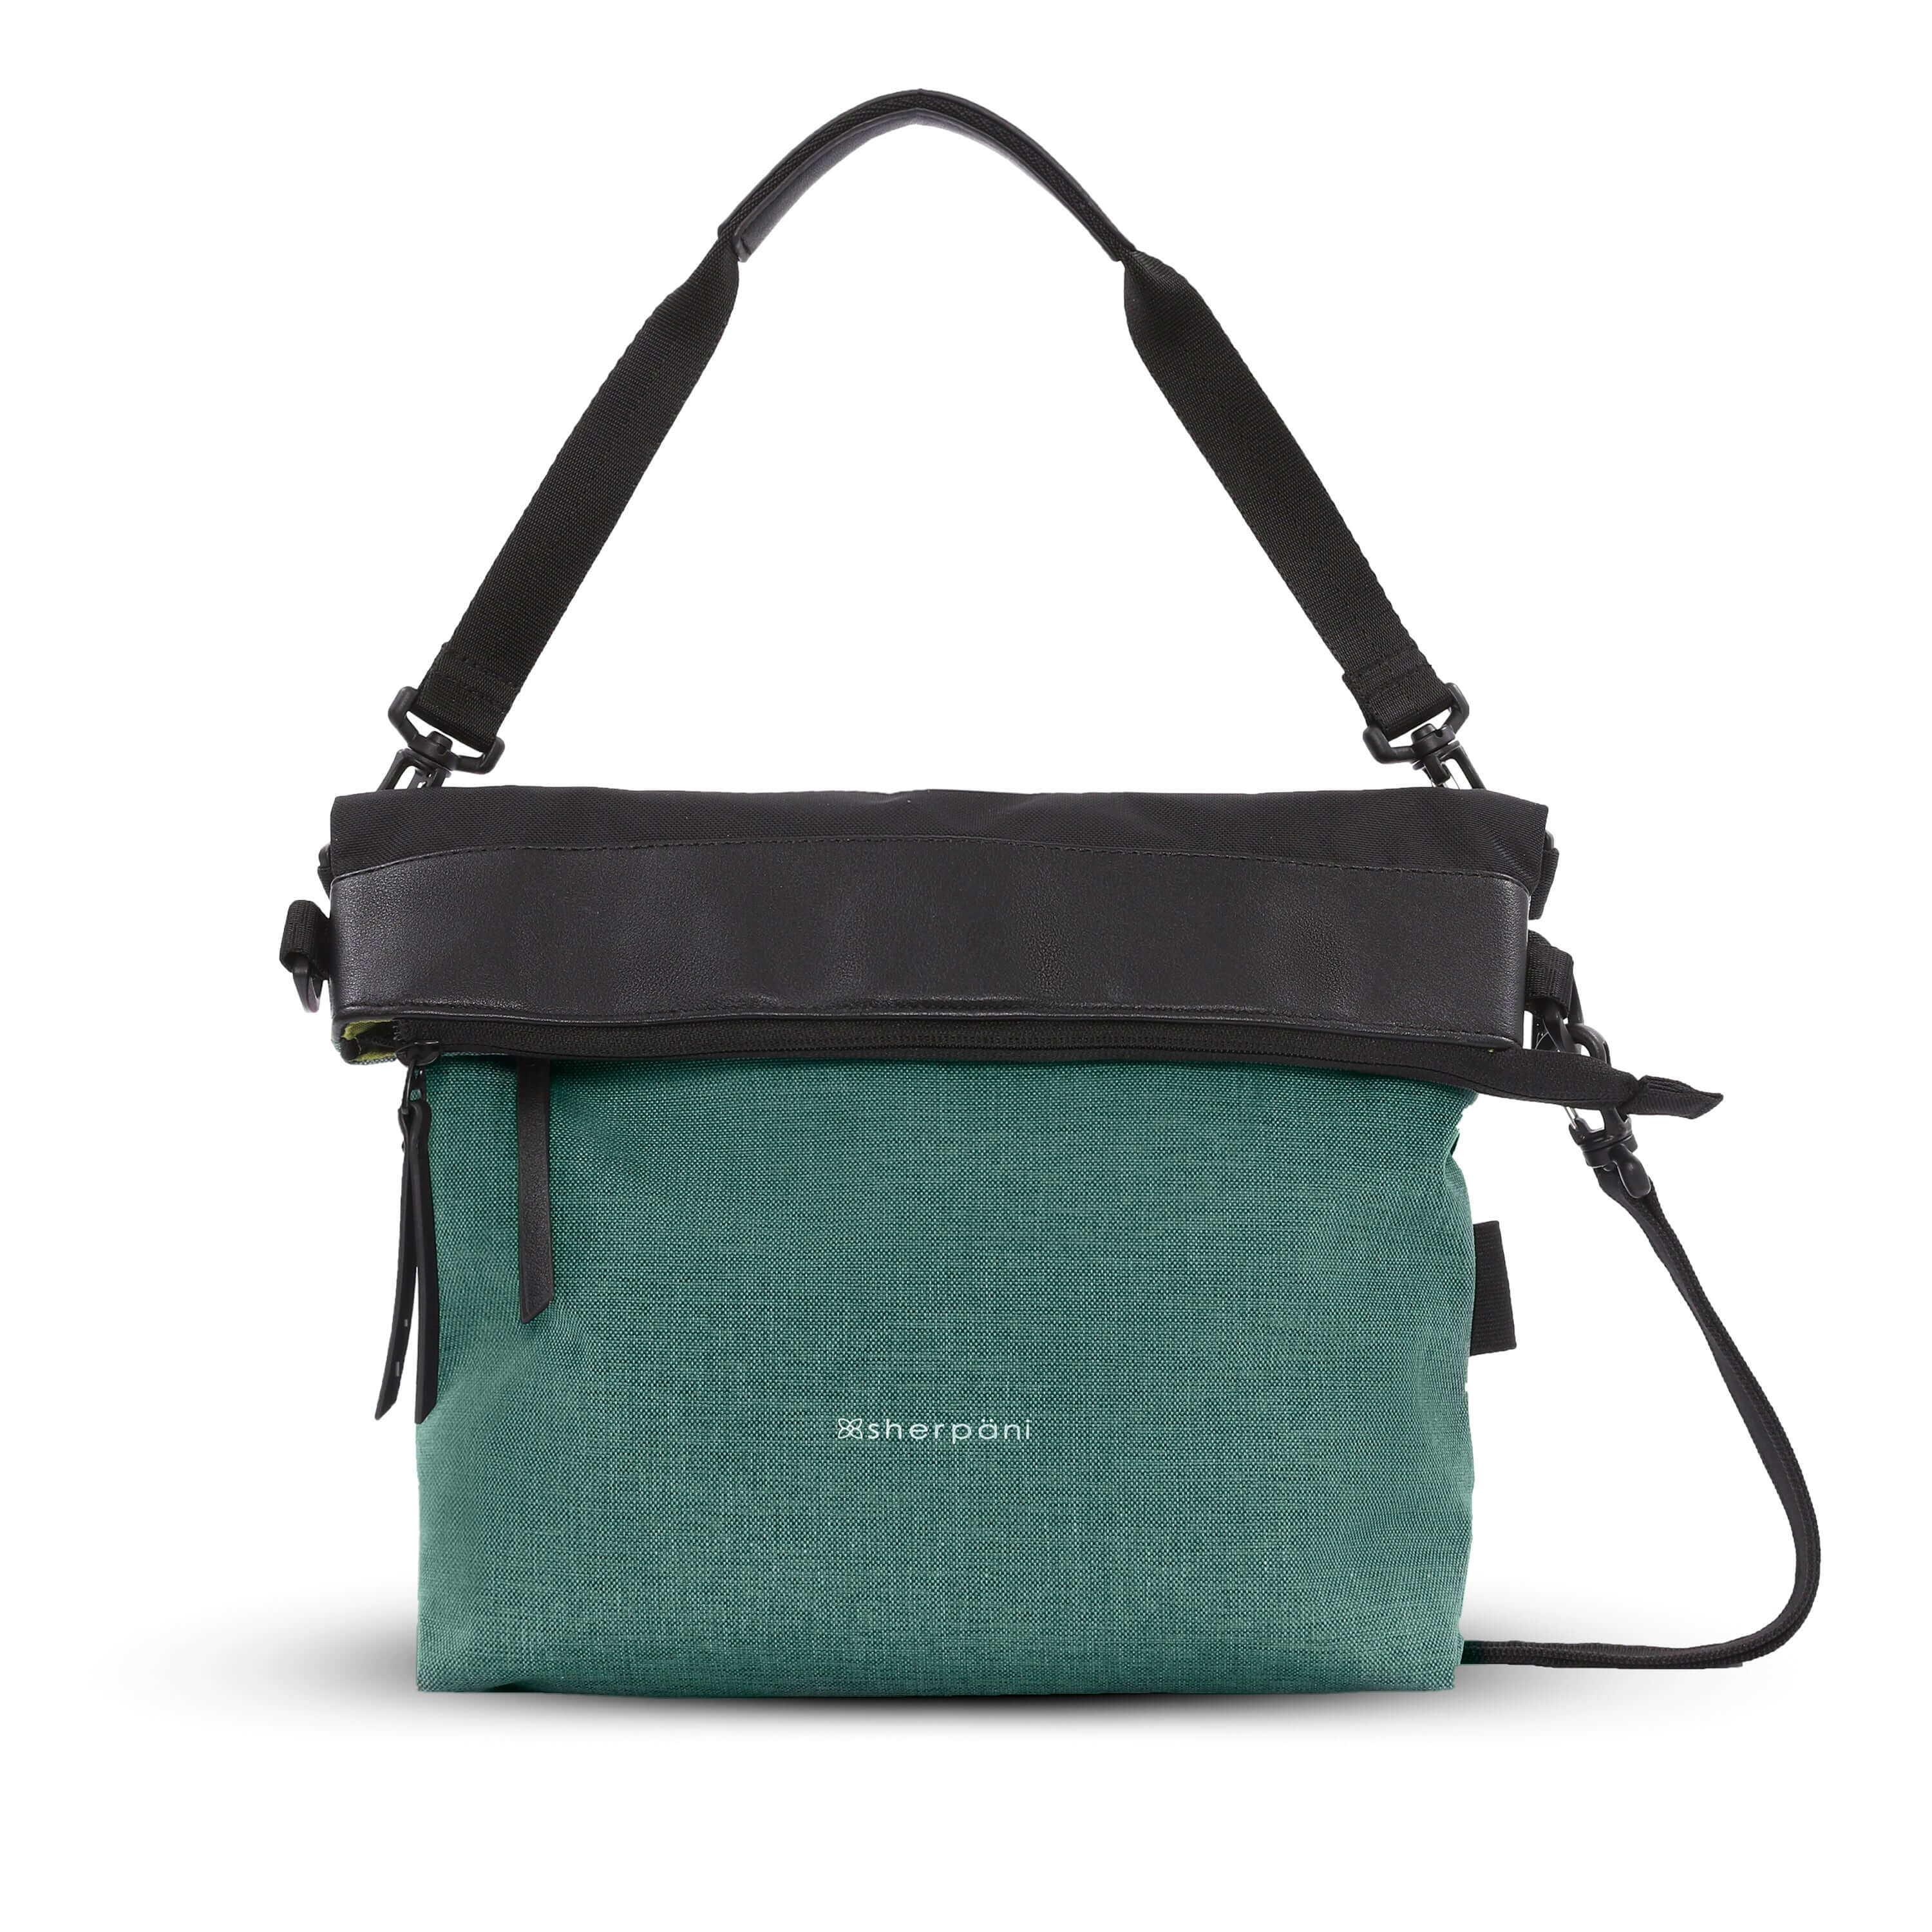 Flat front view of Sherpani&#39;s Anti-Theft bag, the Vale AT in Teal with vegan leather accents in black. The top is folded over creating a two-toned reversible overlap. It has an adjustable/detachable crossbody strap, and a second detachable strap fixed at a shorter length.